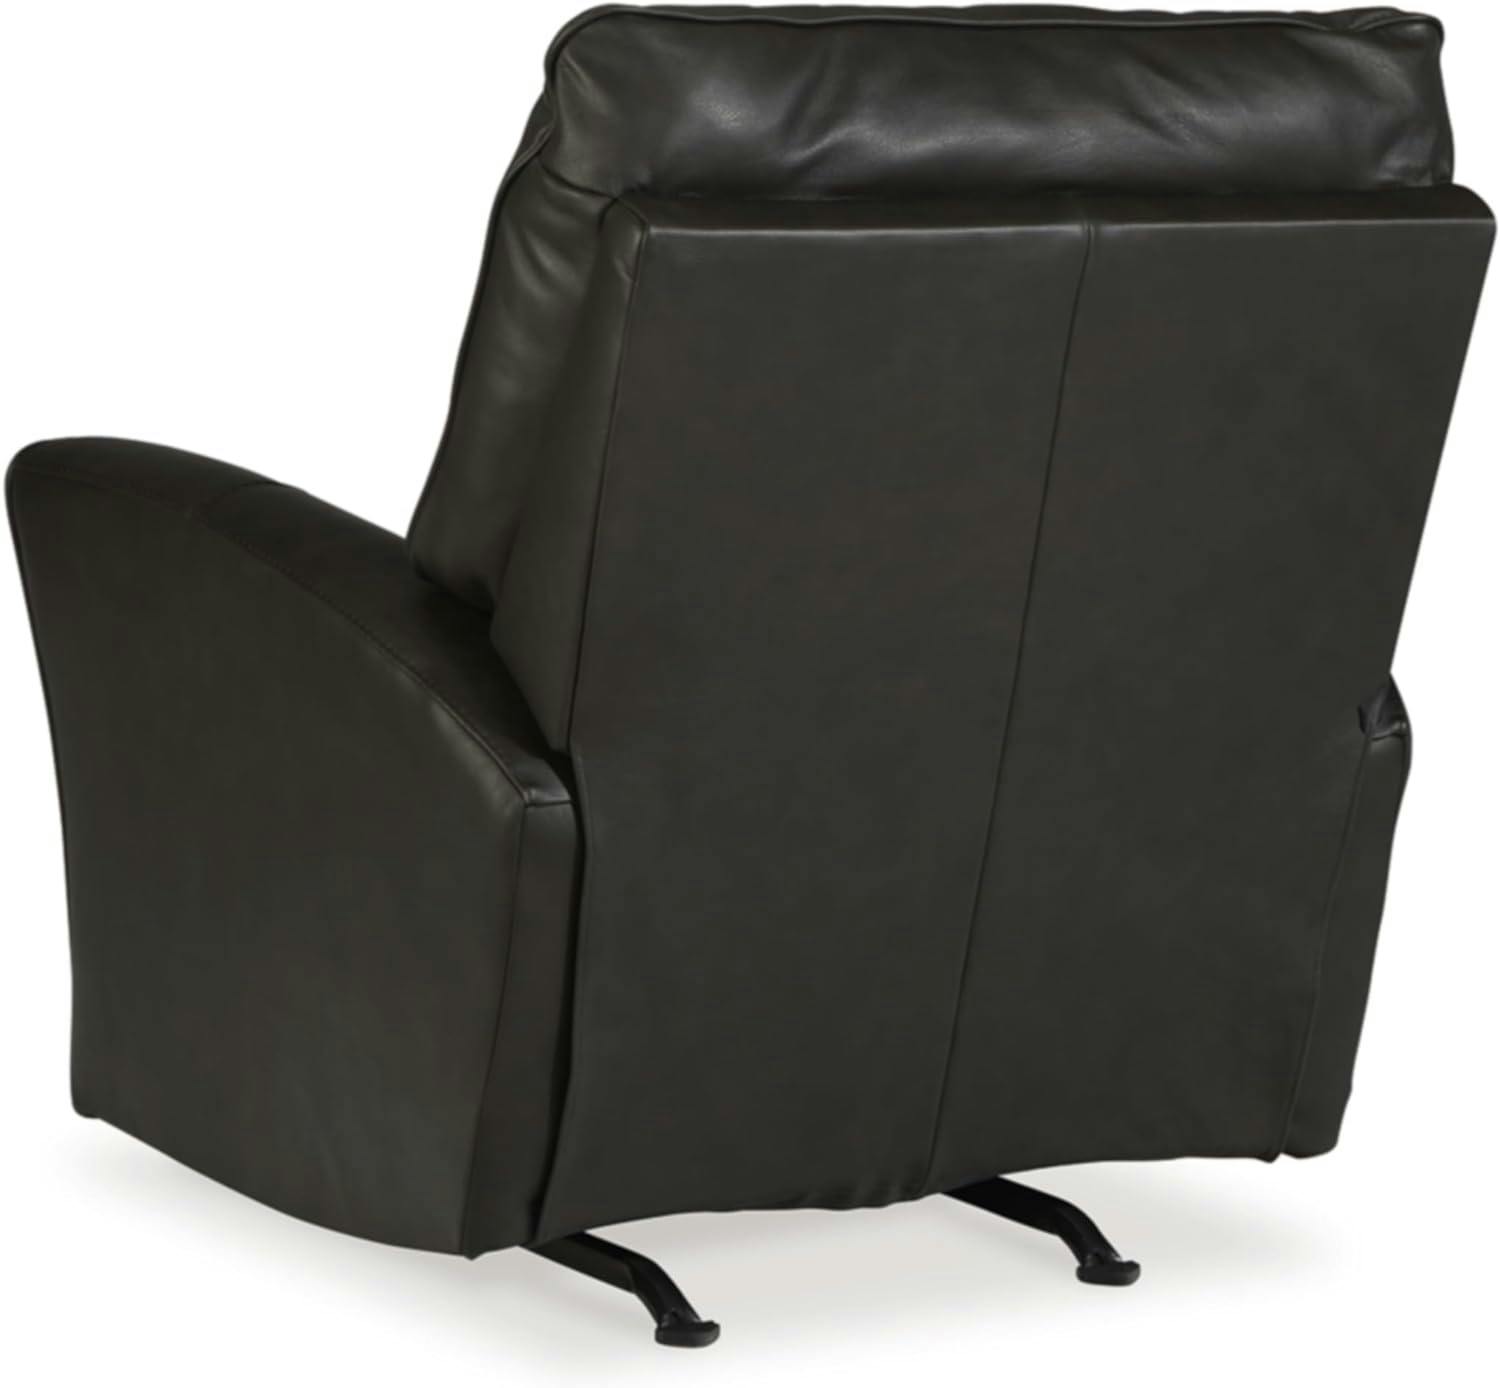 Contemporary 39'' Black Leather Recliner Chair